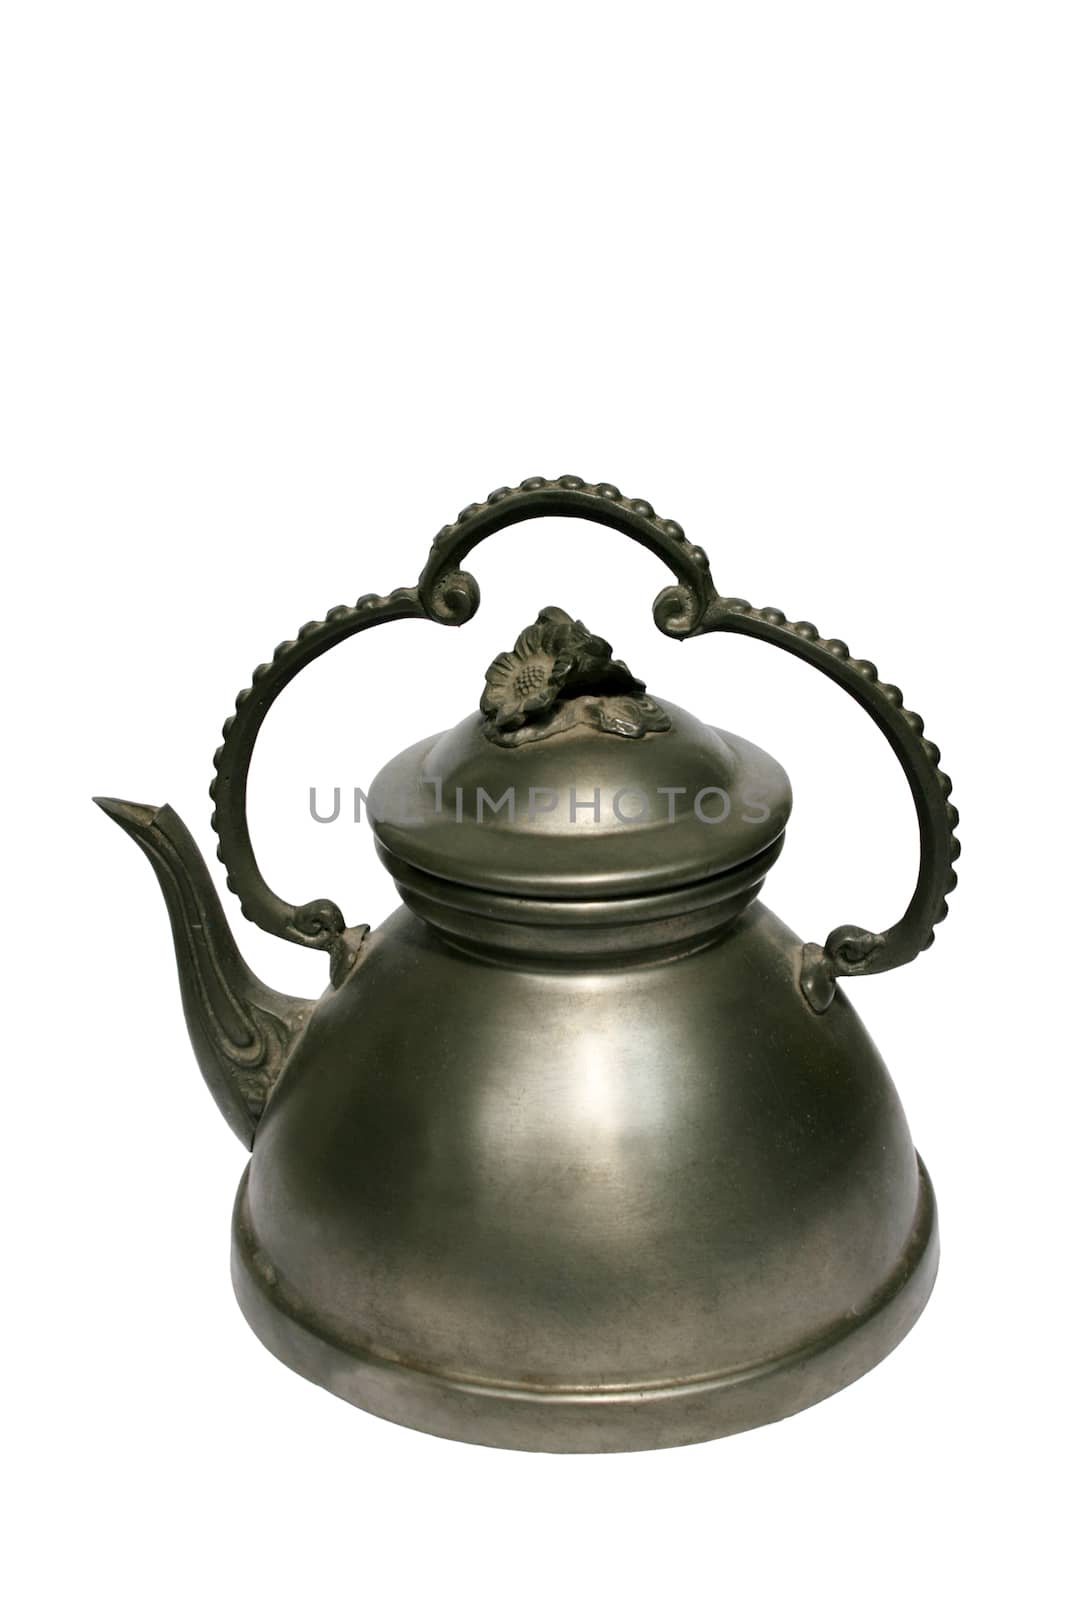 Traditional antique teapot at the white background